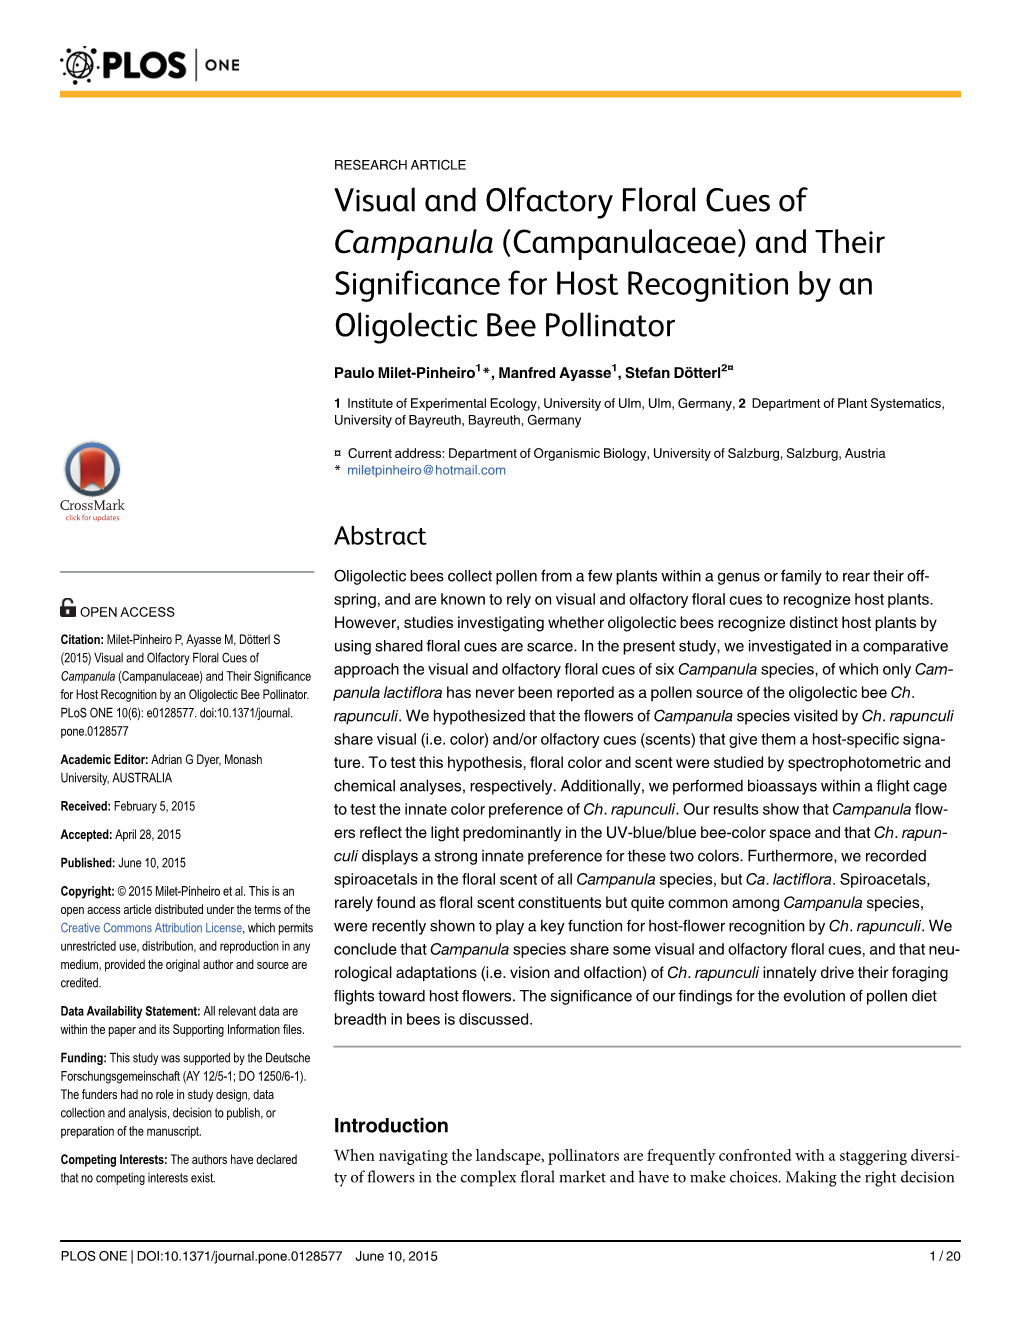 Visual and Olfactory Floral Cues of Campanula (Campanulaceae) and Their Significance for Host Recognition by an Oligolectic Bee Pollinator